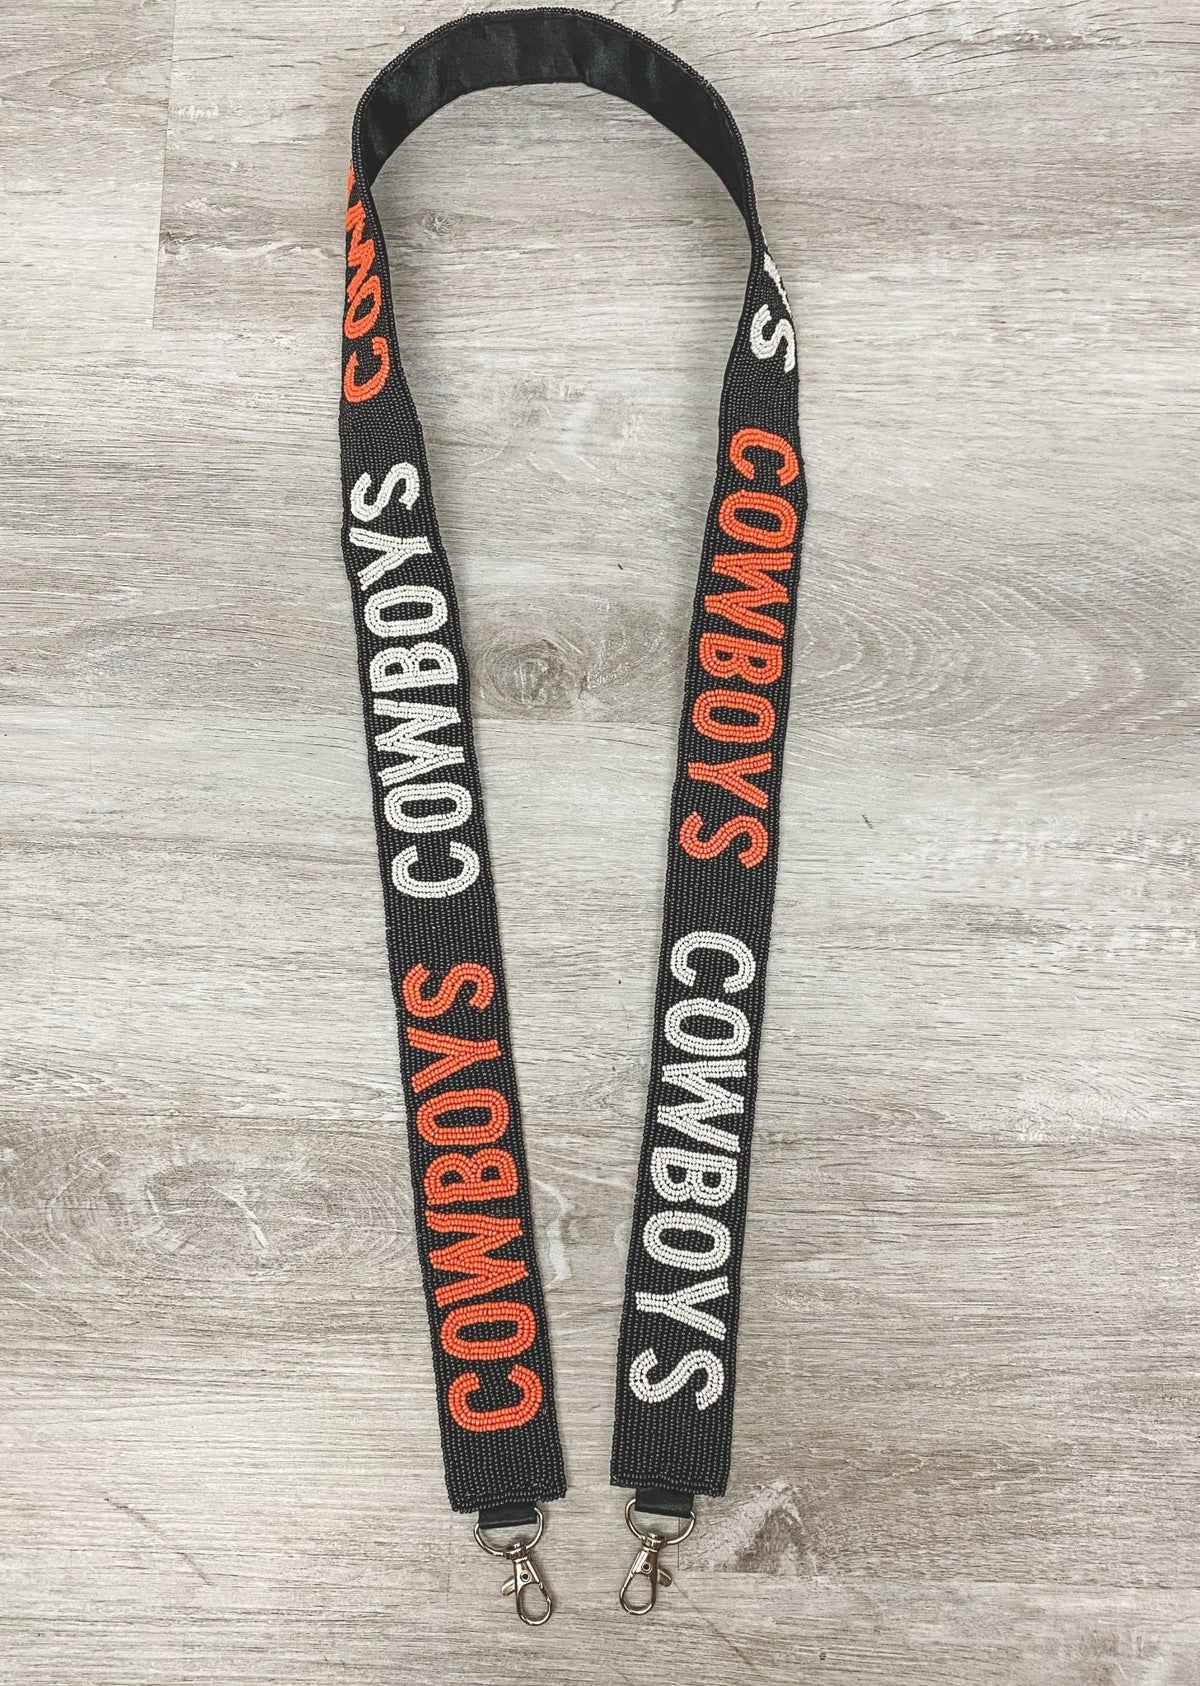 OSU Cowboys beaded guitar strap black - Trendy Bags at Lush Fashion Lounge Boutique in Oklahoma City